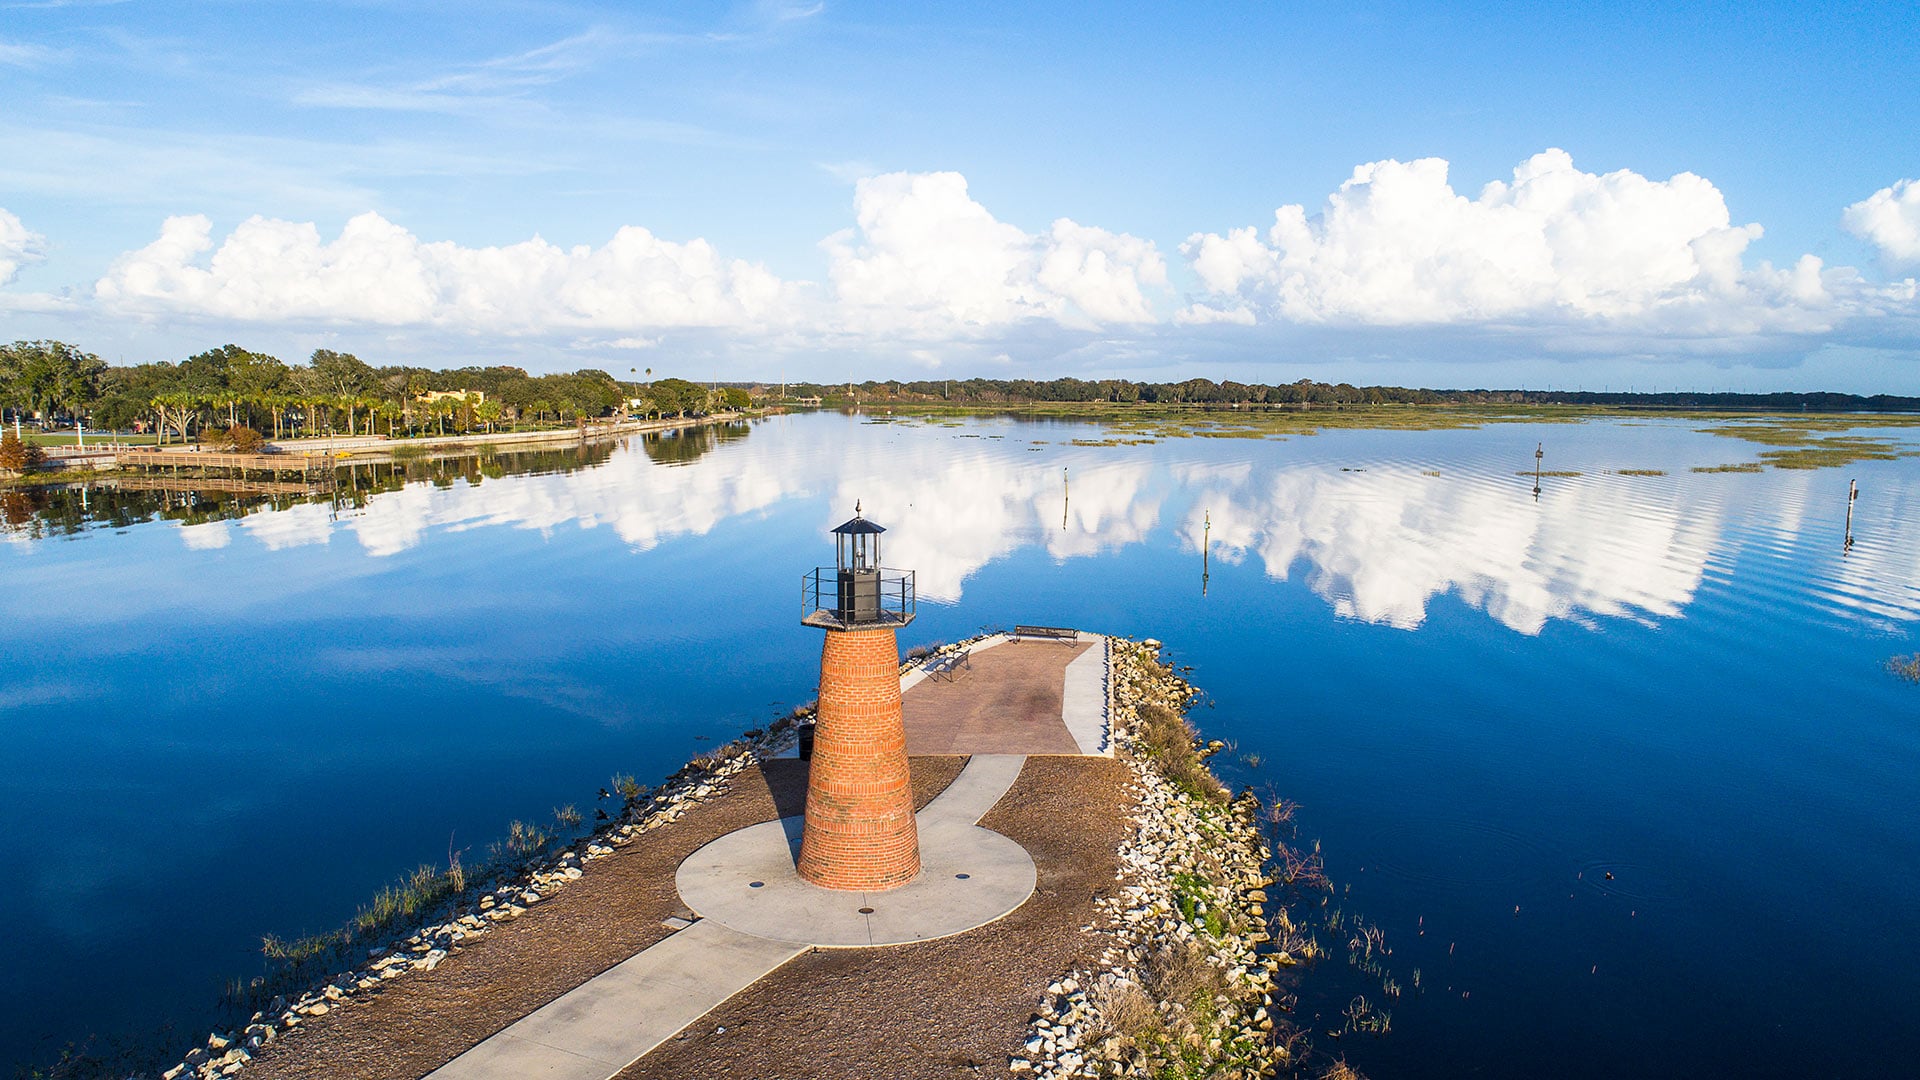 Lighthouse on a lake in Kissimmee